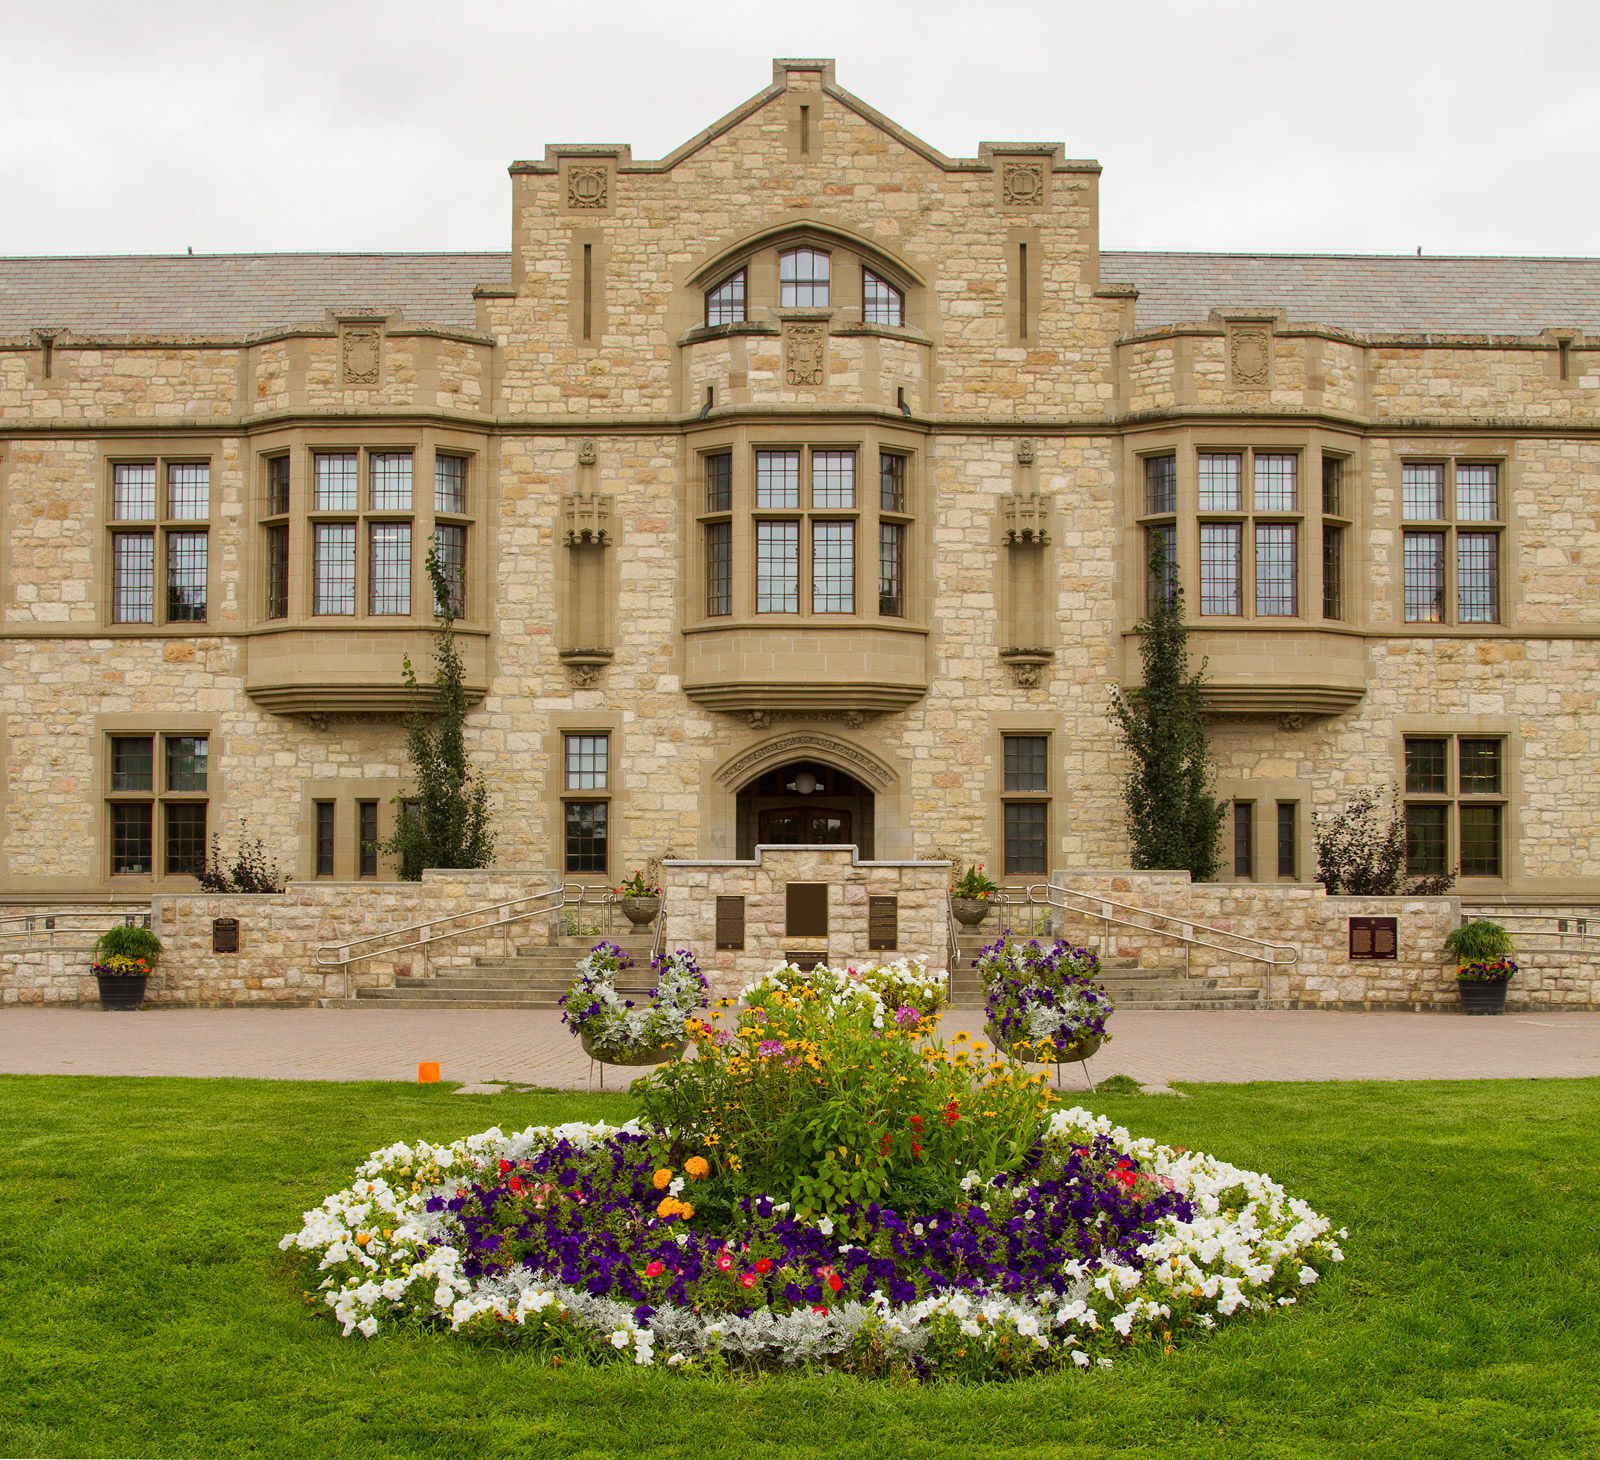 Explore the campus of the University of Saskatchewan when you stay at one of the best Saskatoon hotels for students and their families.